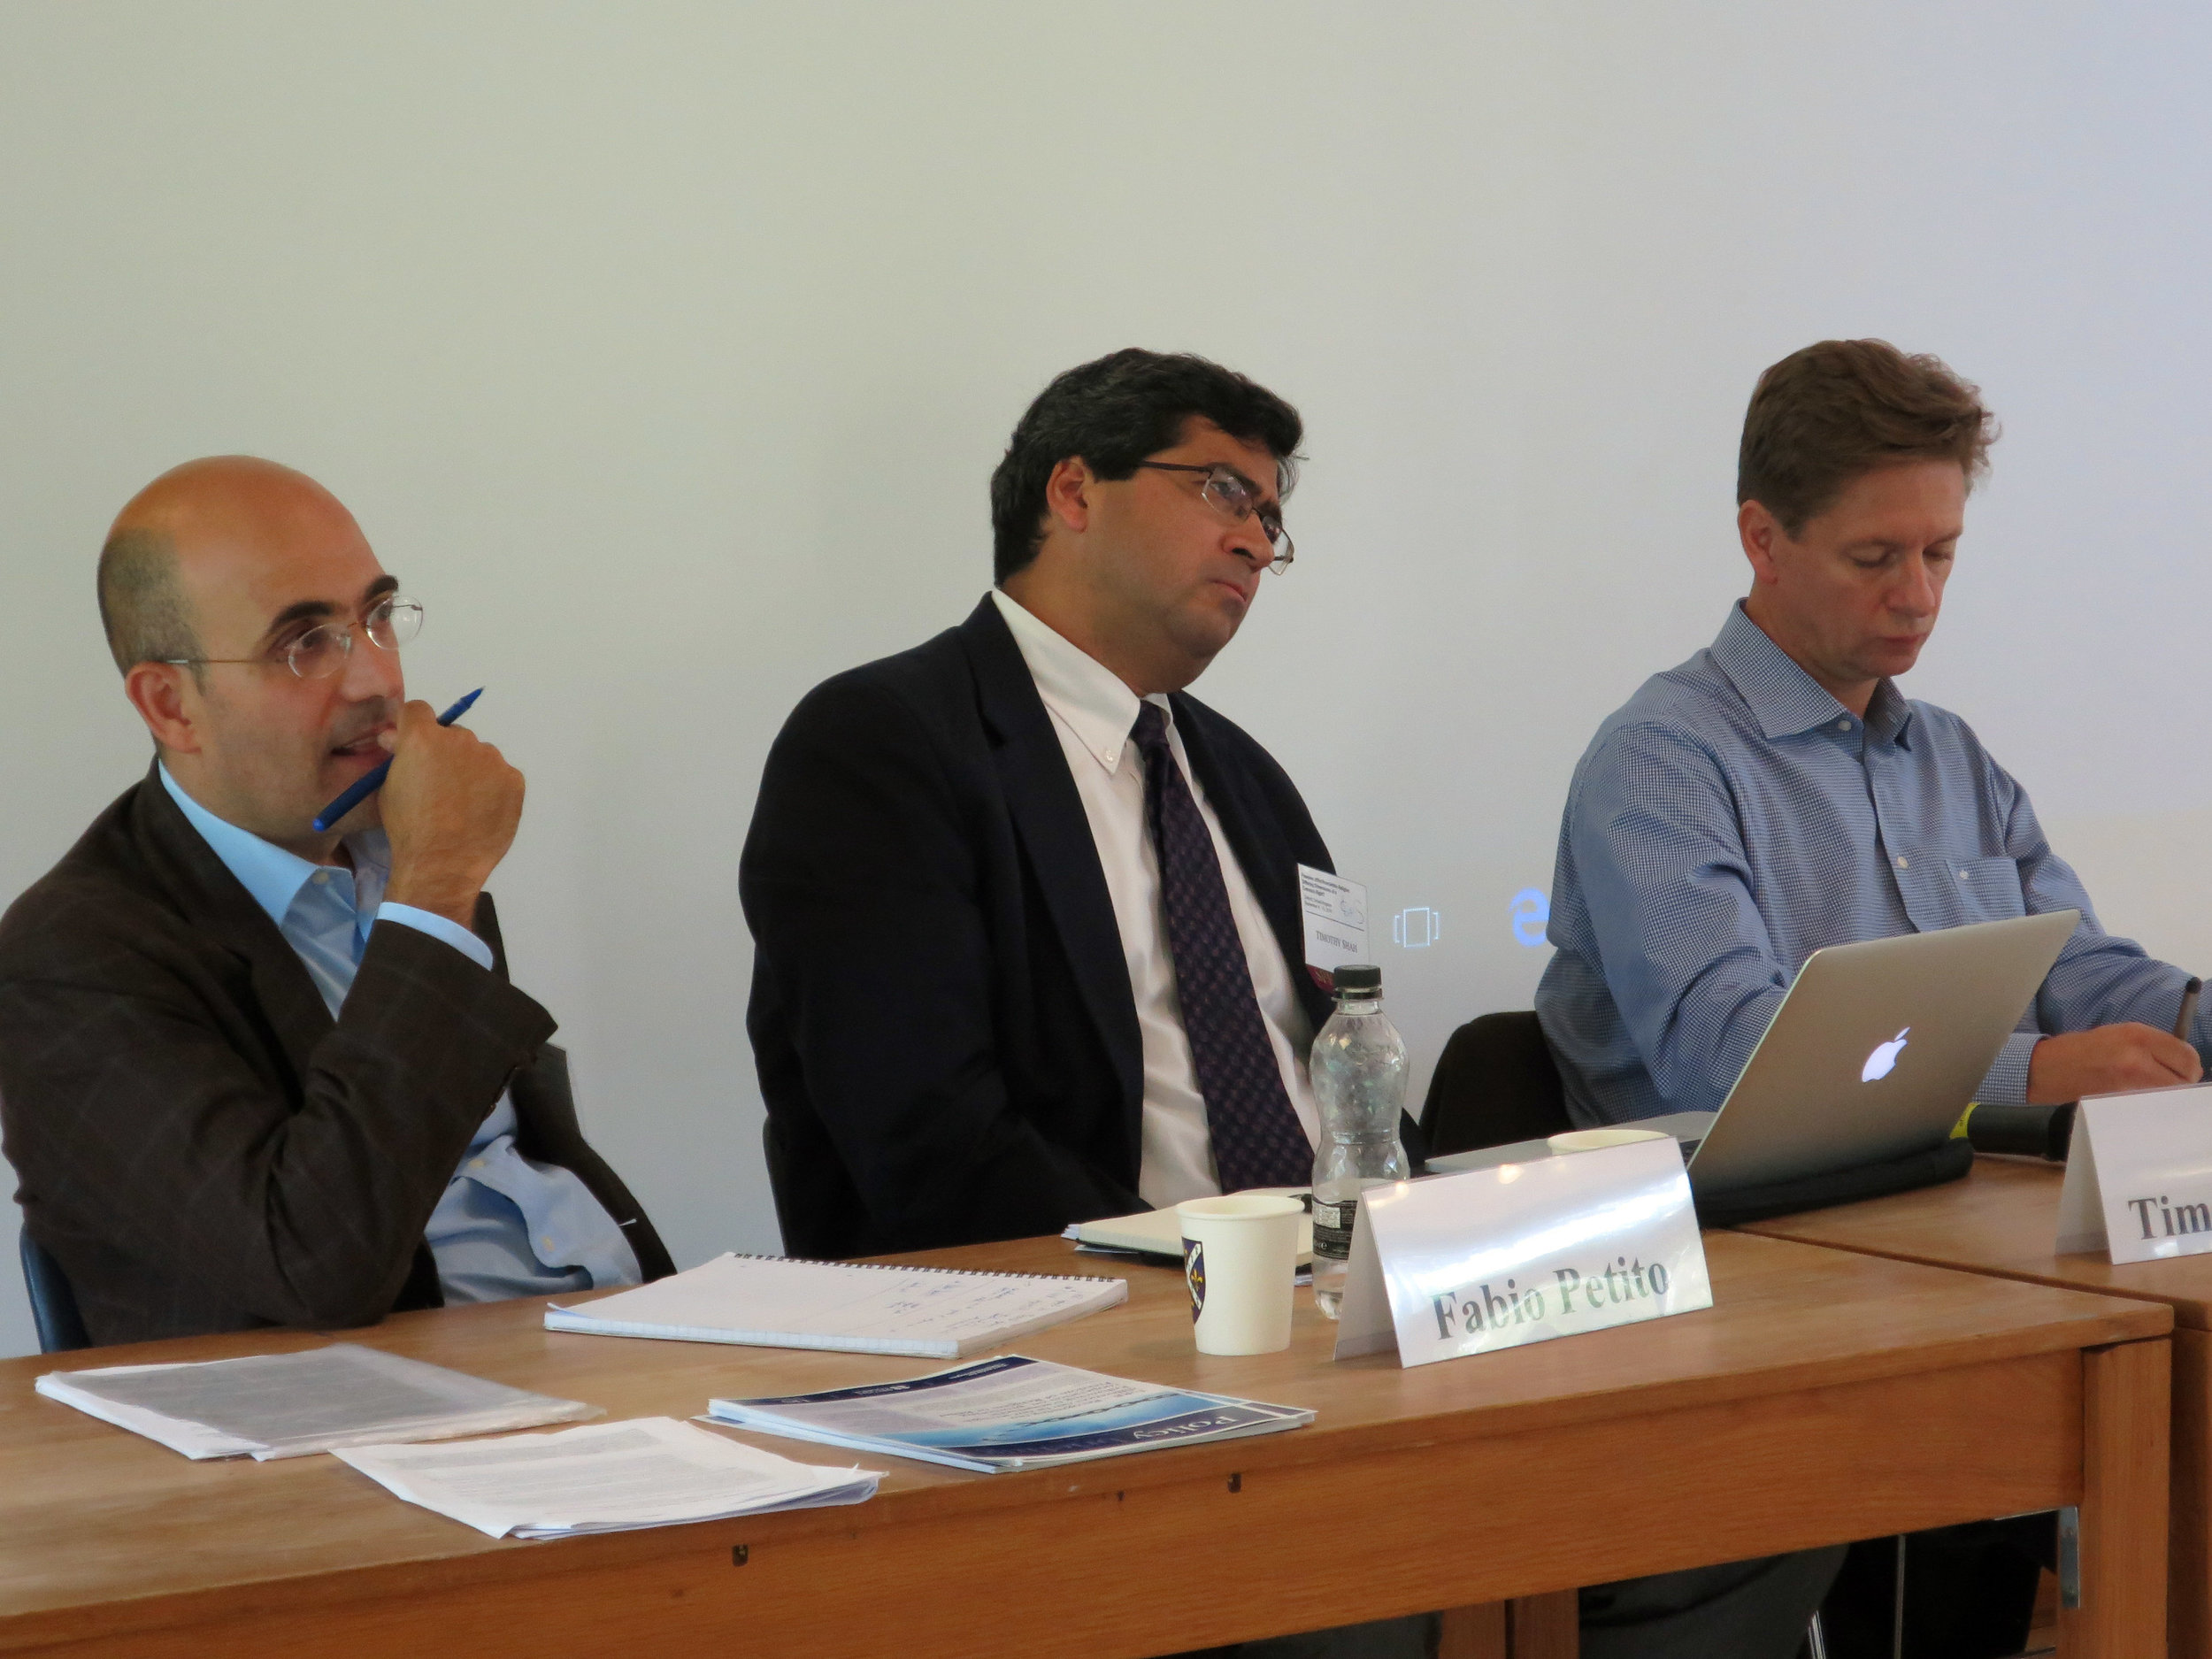  Tim Shah, Senior Advisor, (center) and co-panelists respond to audience questions 